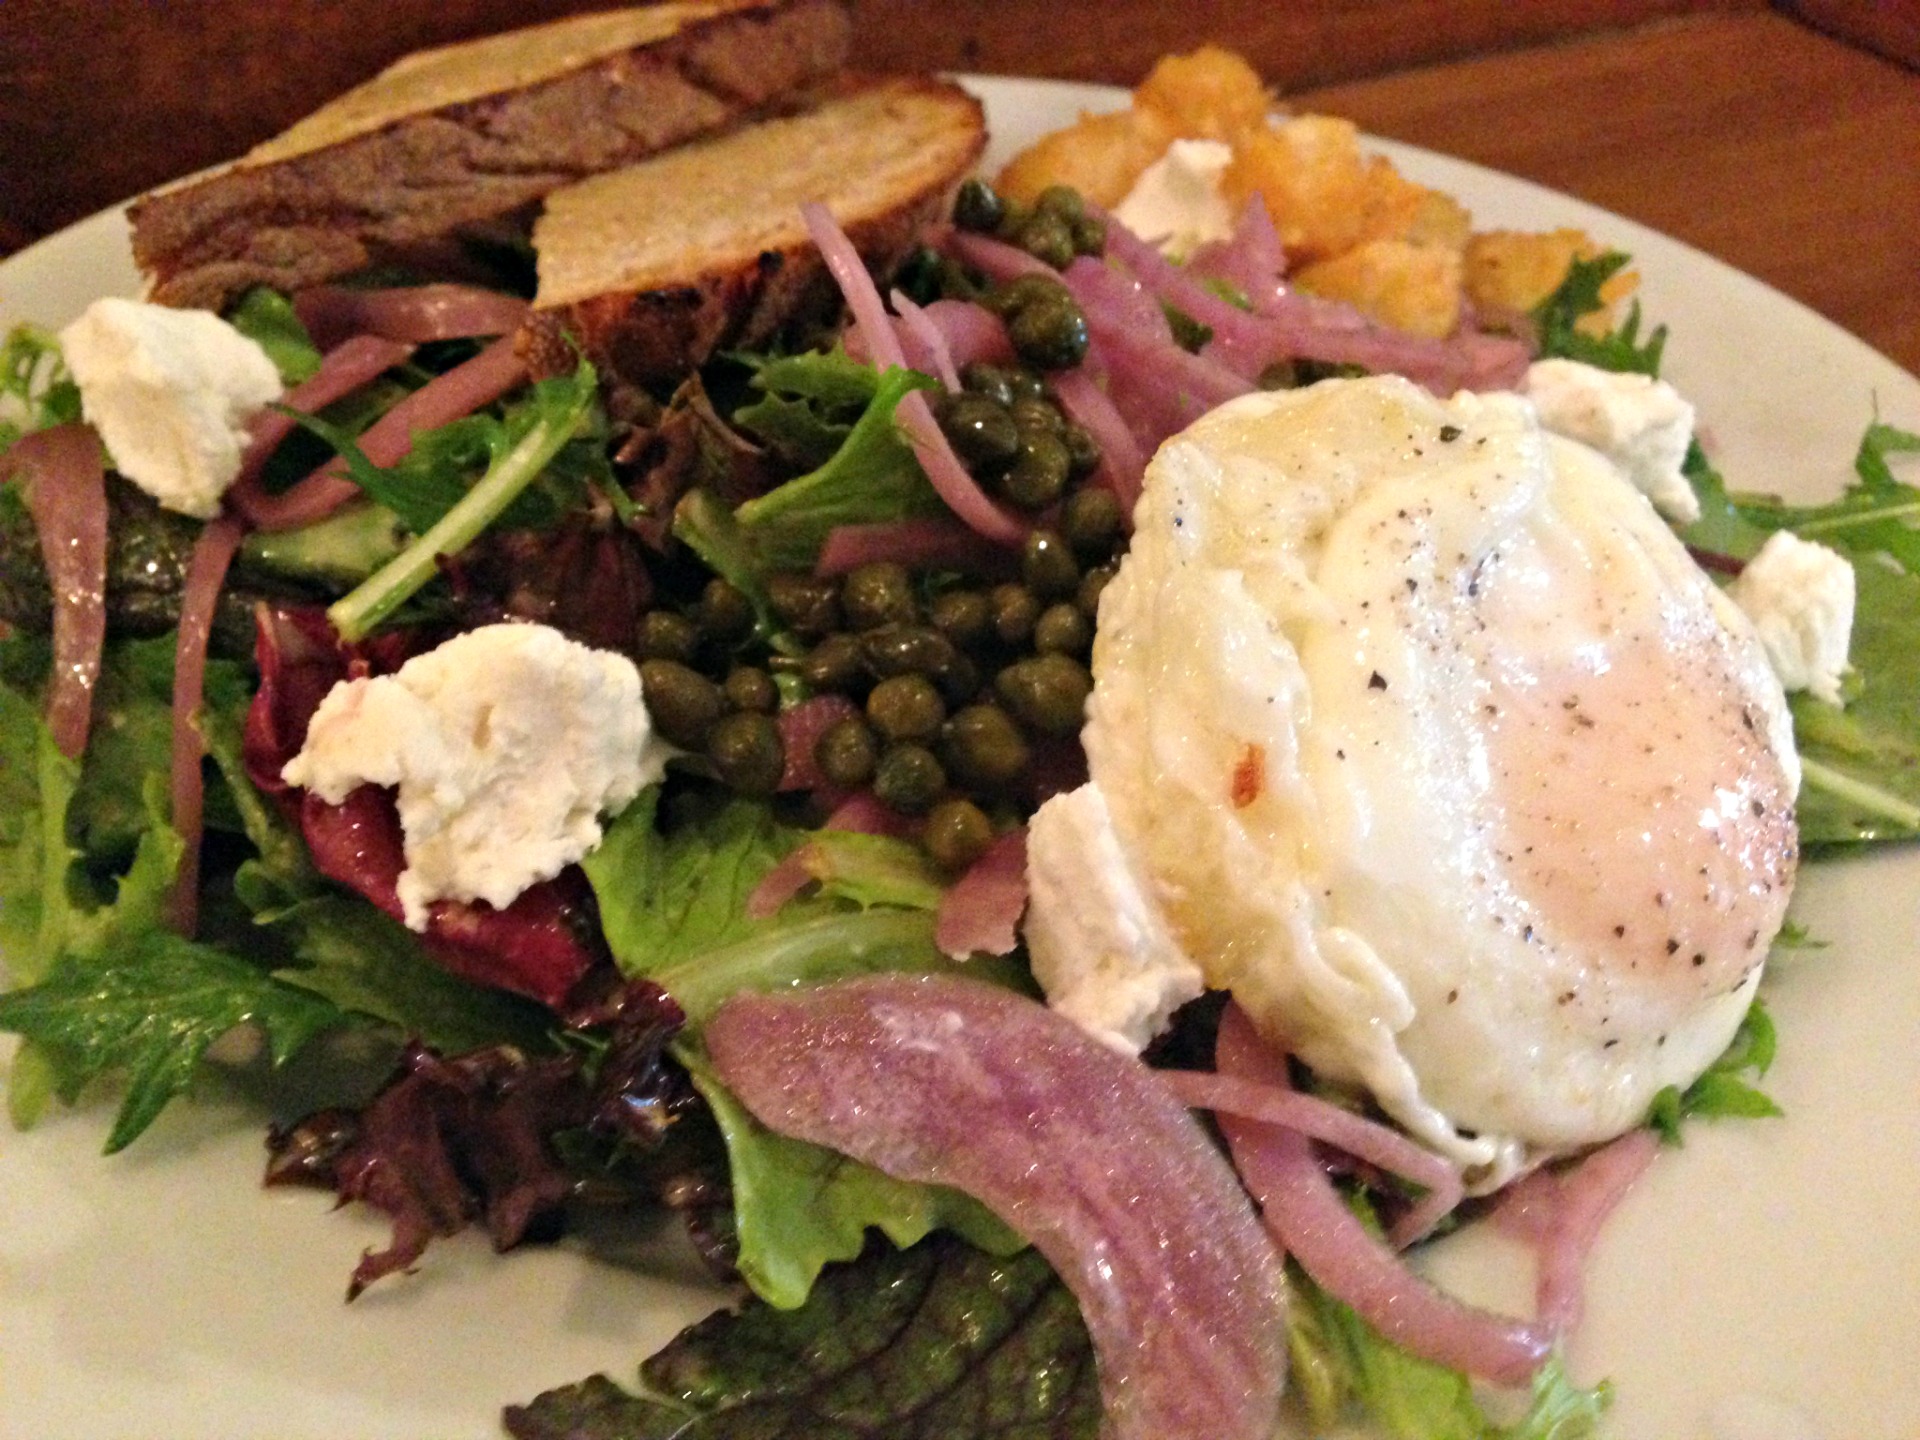 The Breakfast Salad at Stag's.